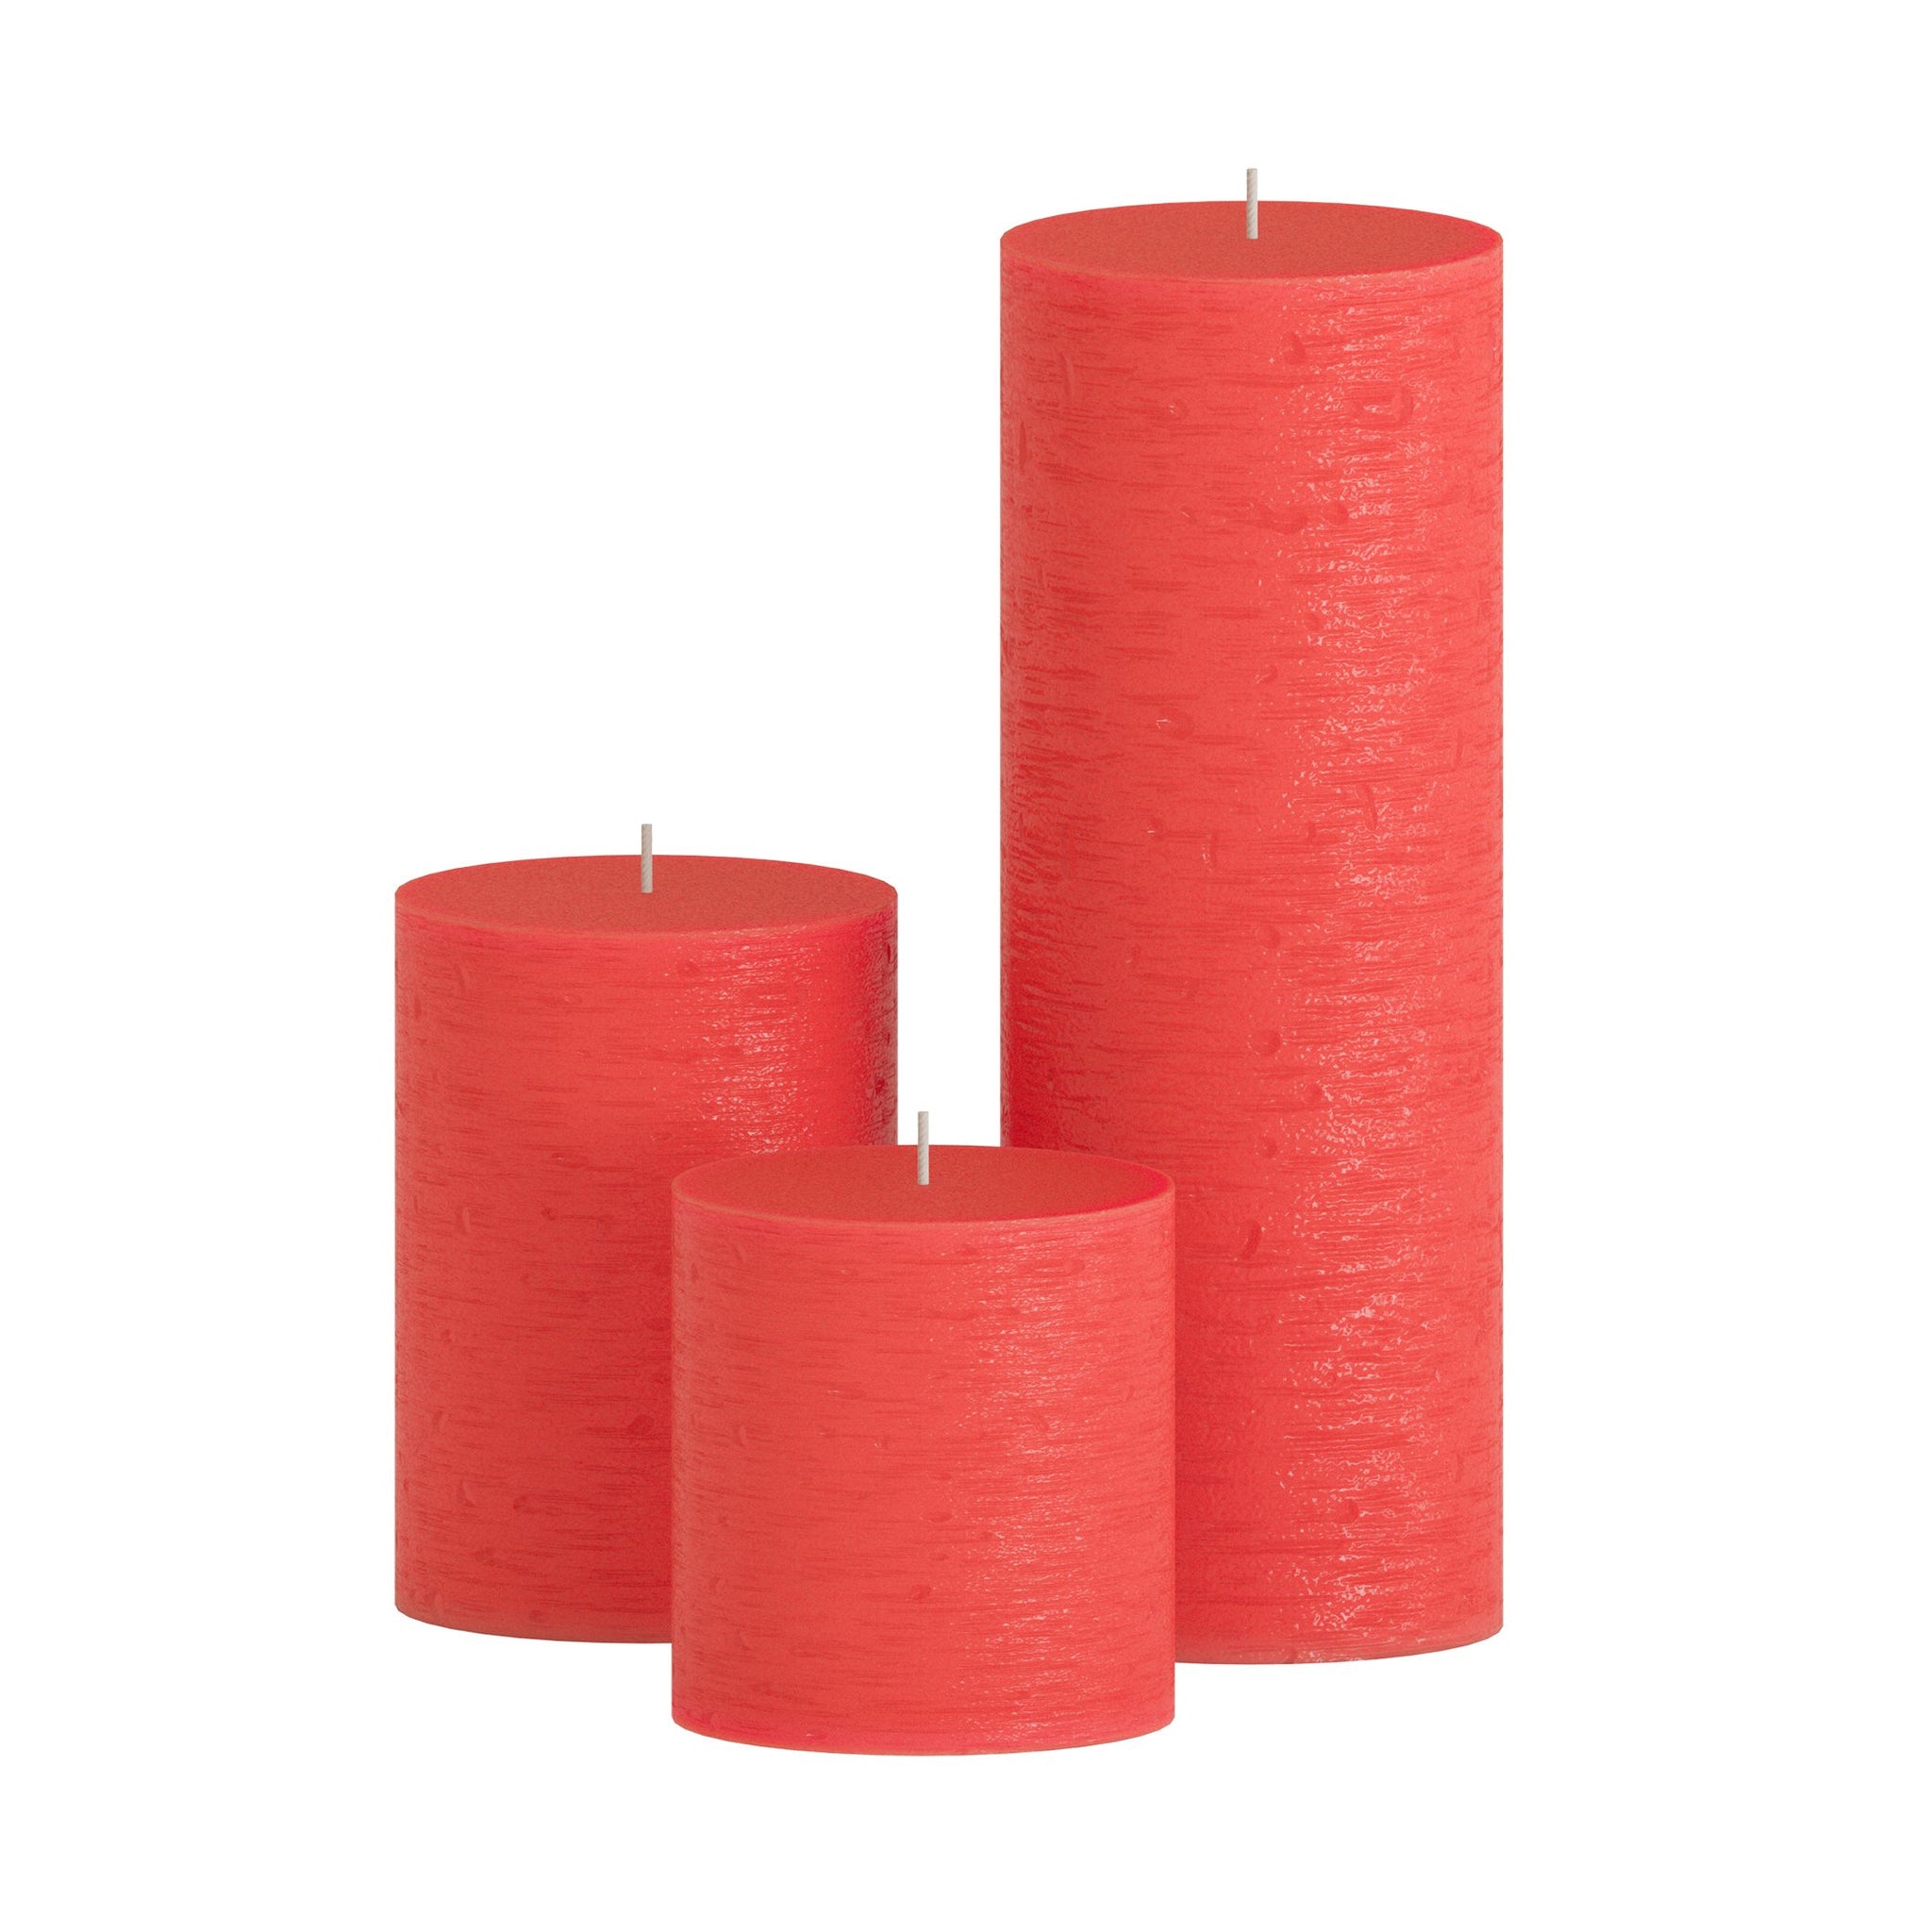 CANDWAX Red Pillar Mix - 3 inch, 4 inch & 8 inch